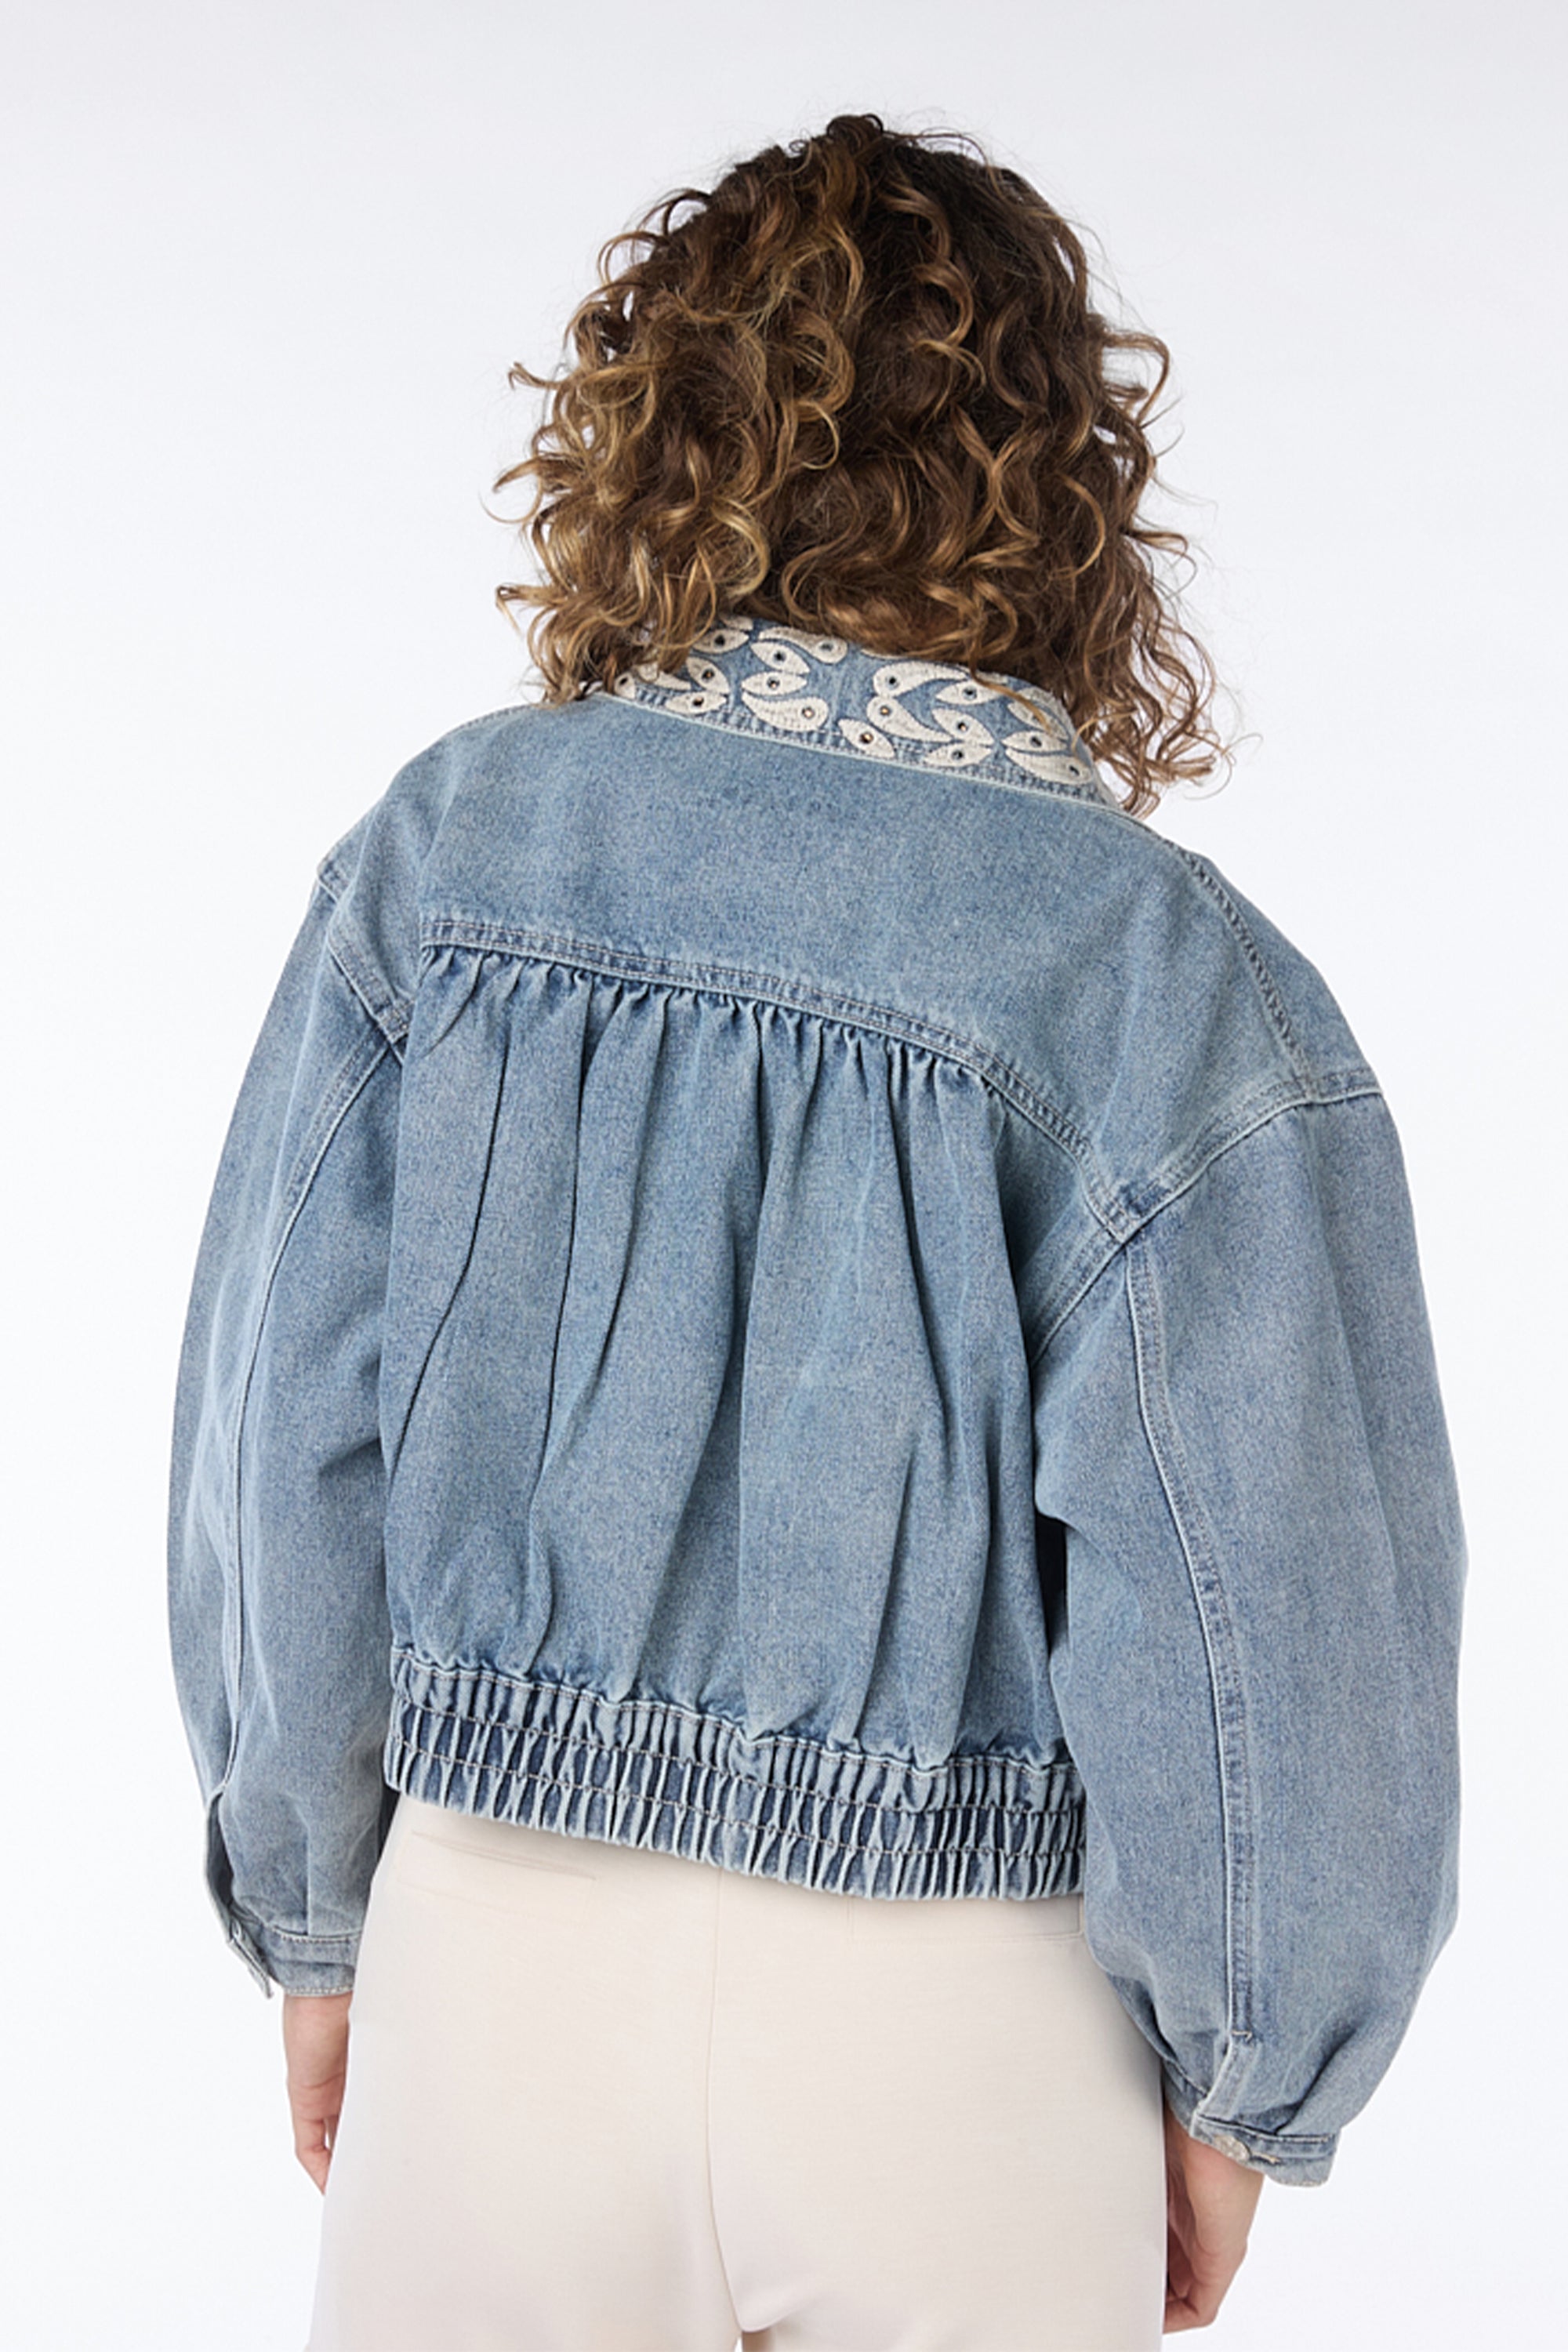 Back view of Esqualo (SP2412002) Women's Long Sleeve Cropped Blue Jean Jacket With Embroidery & Rhinestones on Collar and Front Panels